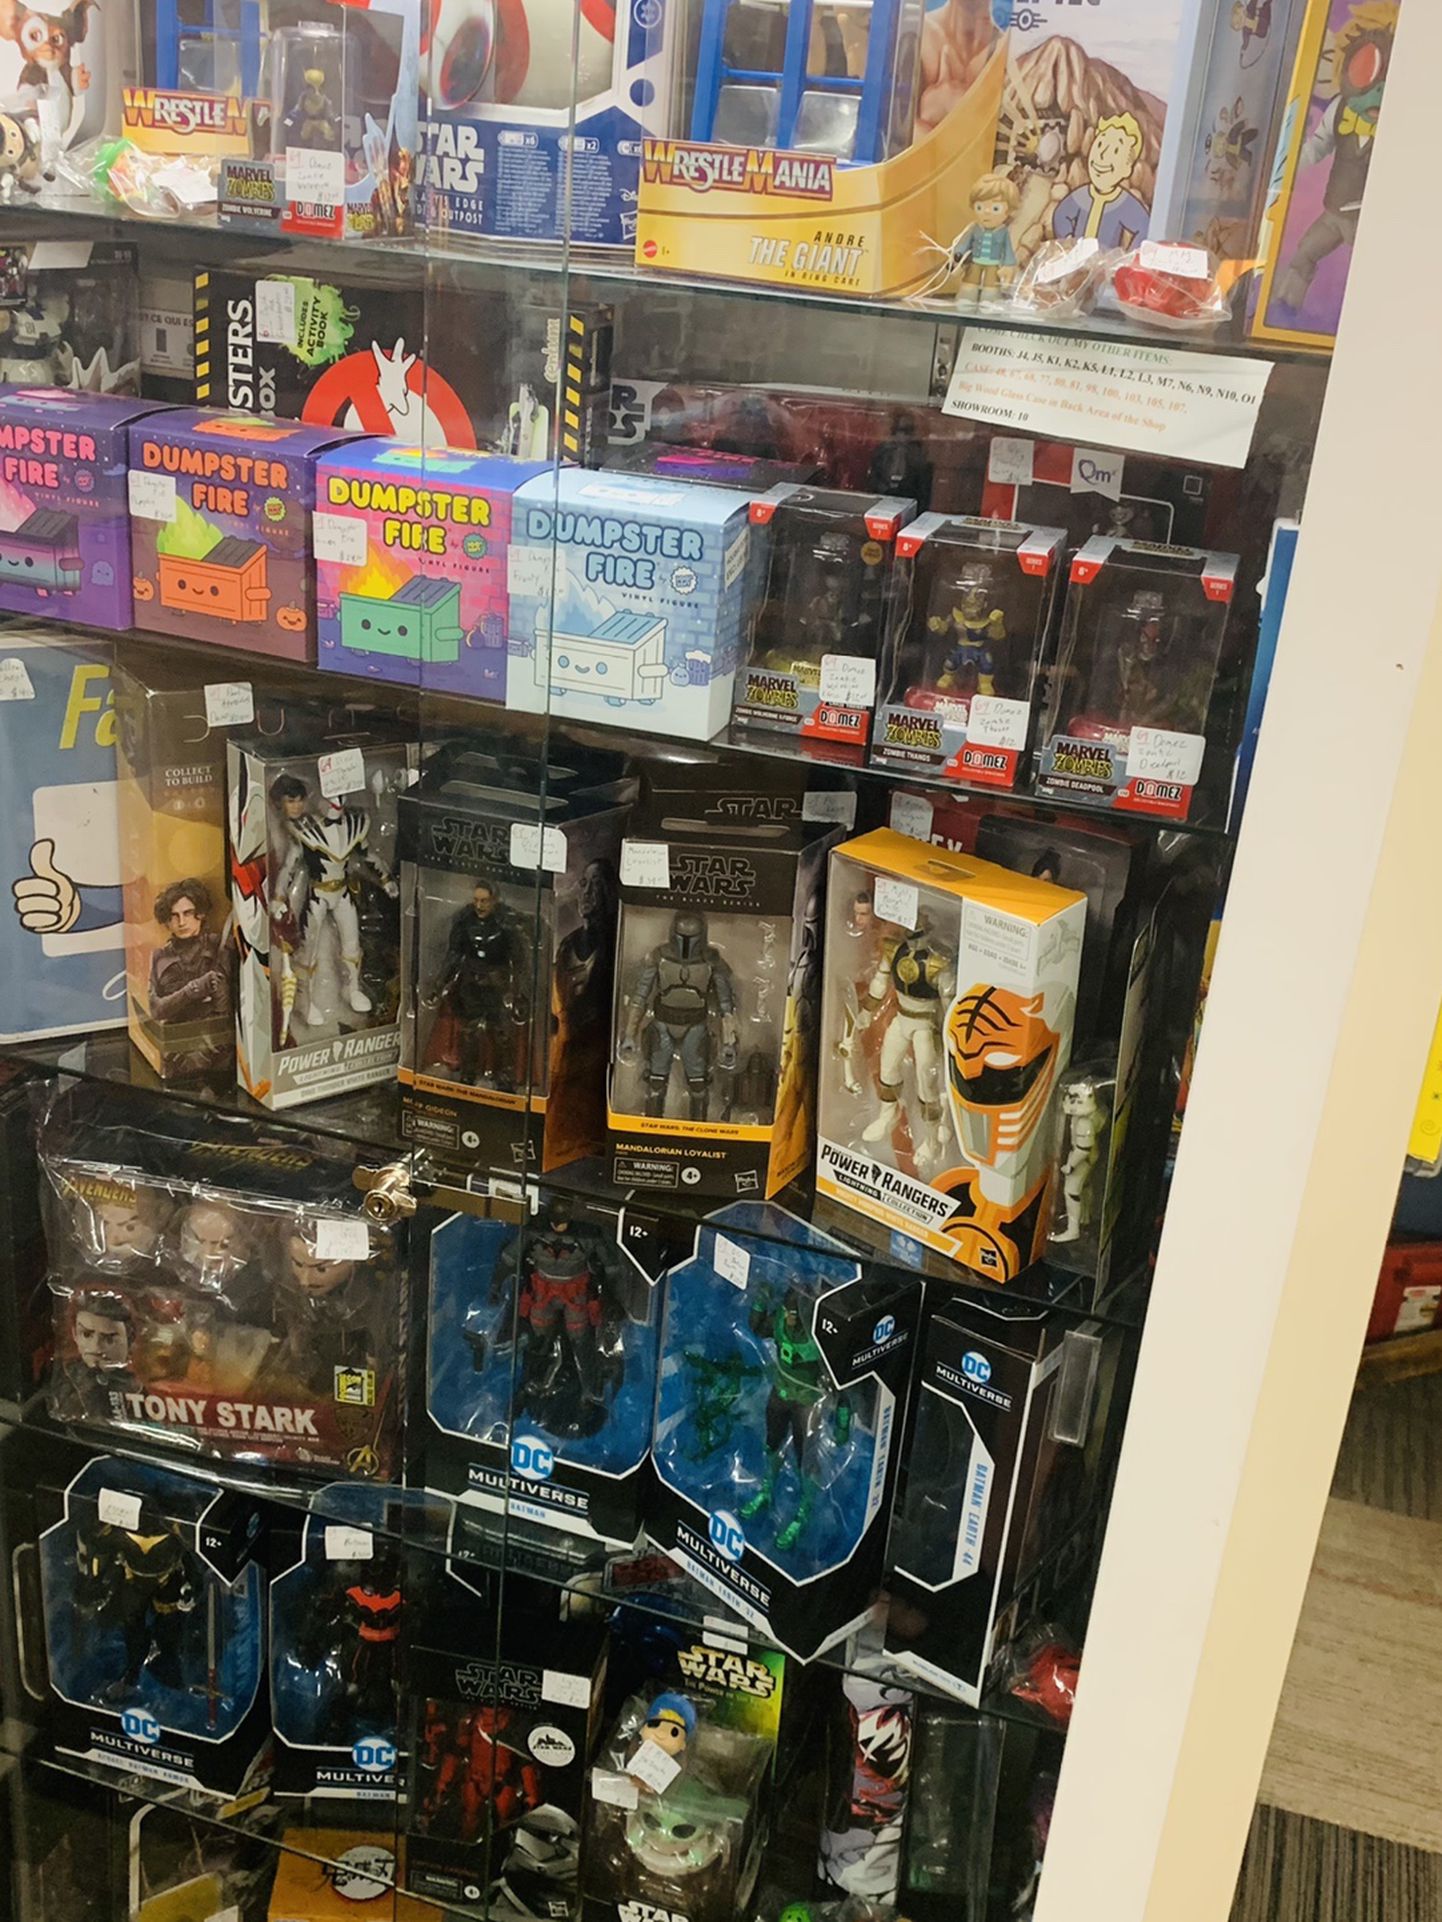 Action Figures, Wwe Wrestling Figures, Funko Pops, Hot Wheels, Bobbleheads, Toys, Superheroes, Comic Books, Sports Cards, Star Wars, 